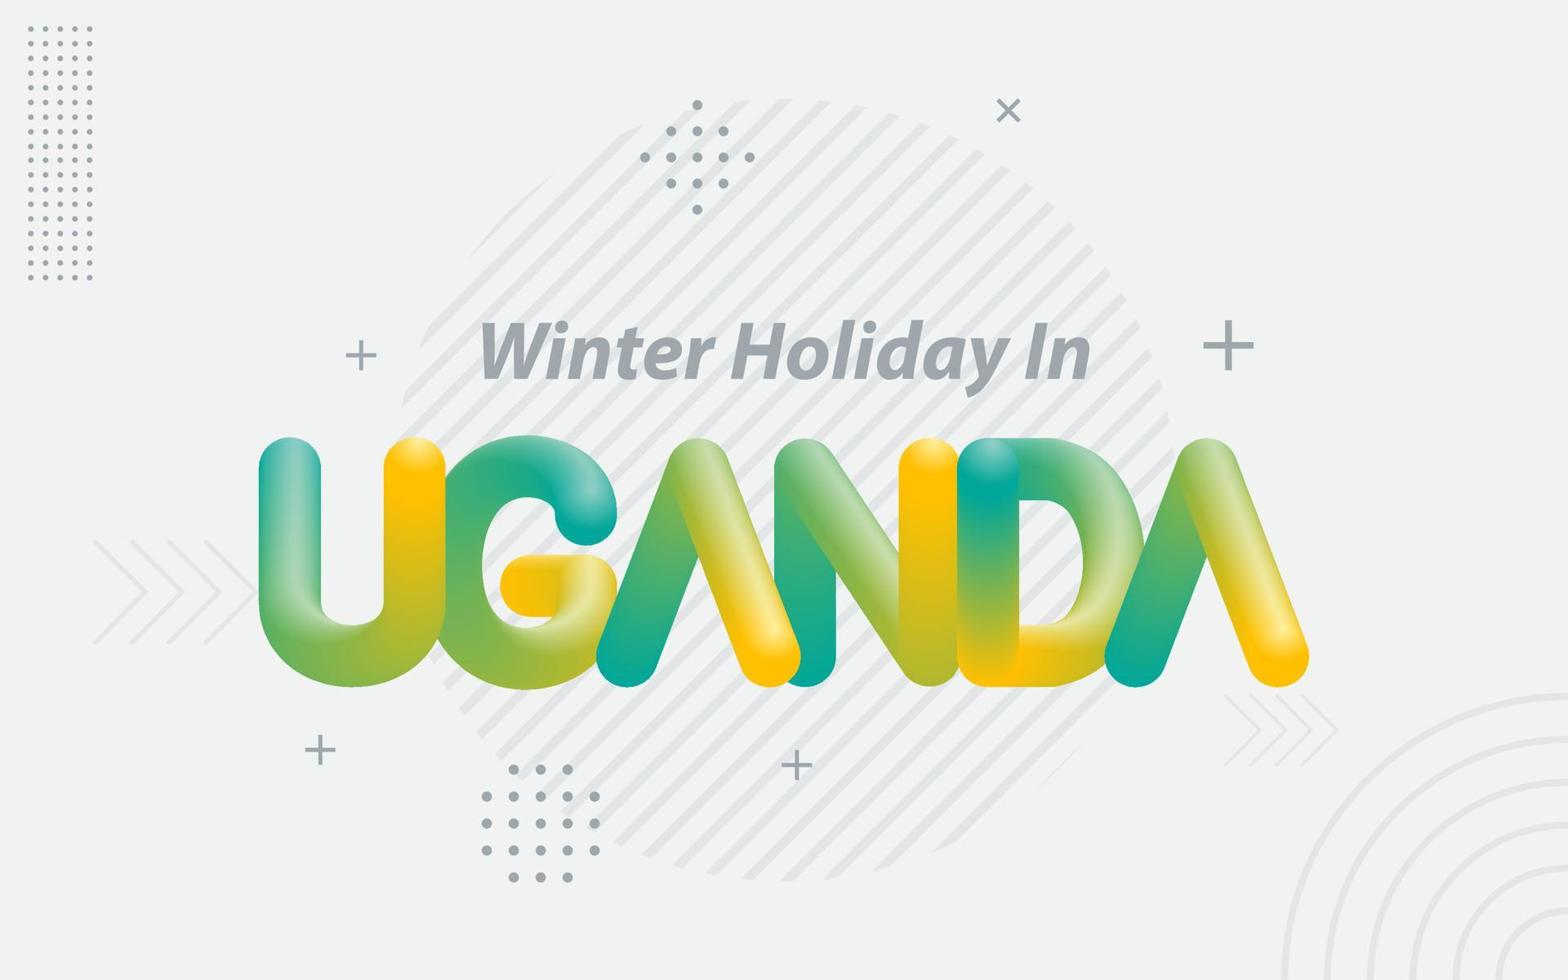 Winter Holiday in Uganda. Creative Typography with 3d Blend effect vector